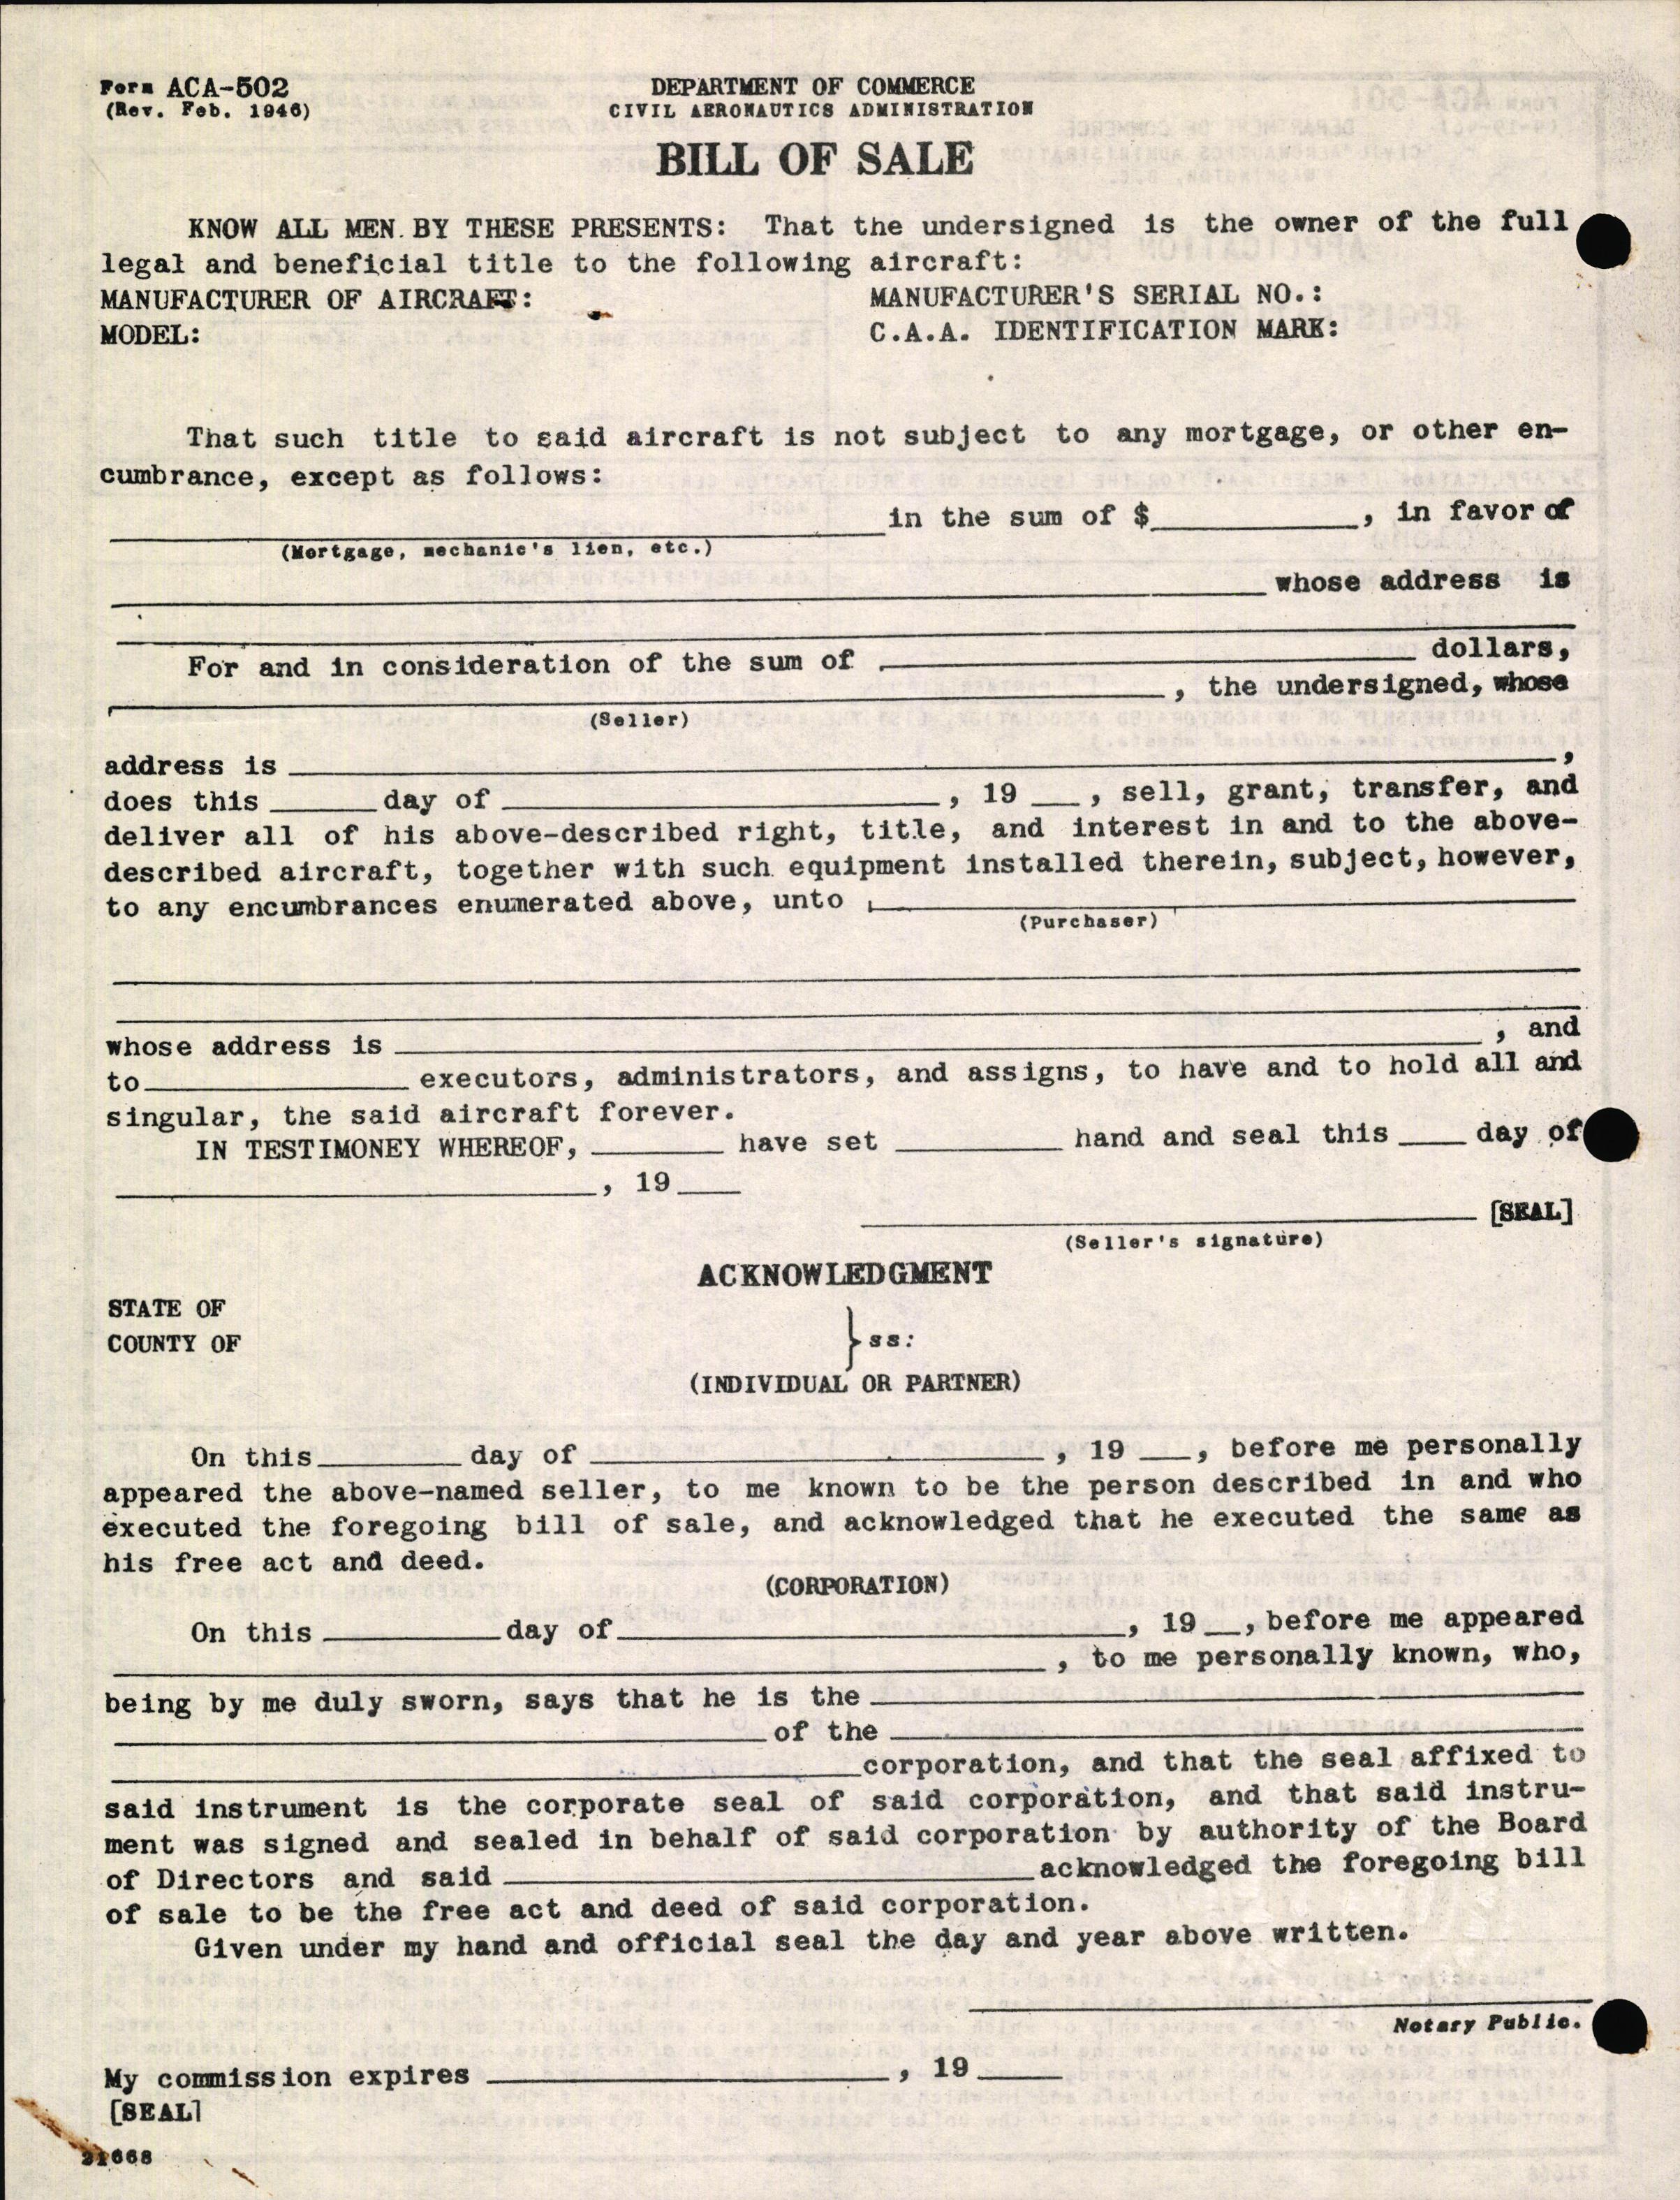 Sample page 2 from AirCorps Library document: Technical Information for Serial Number 2138